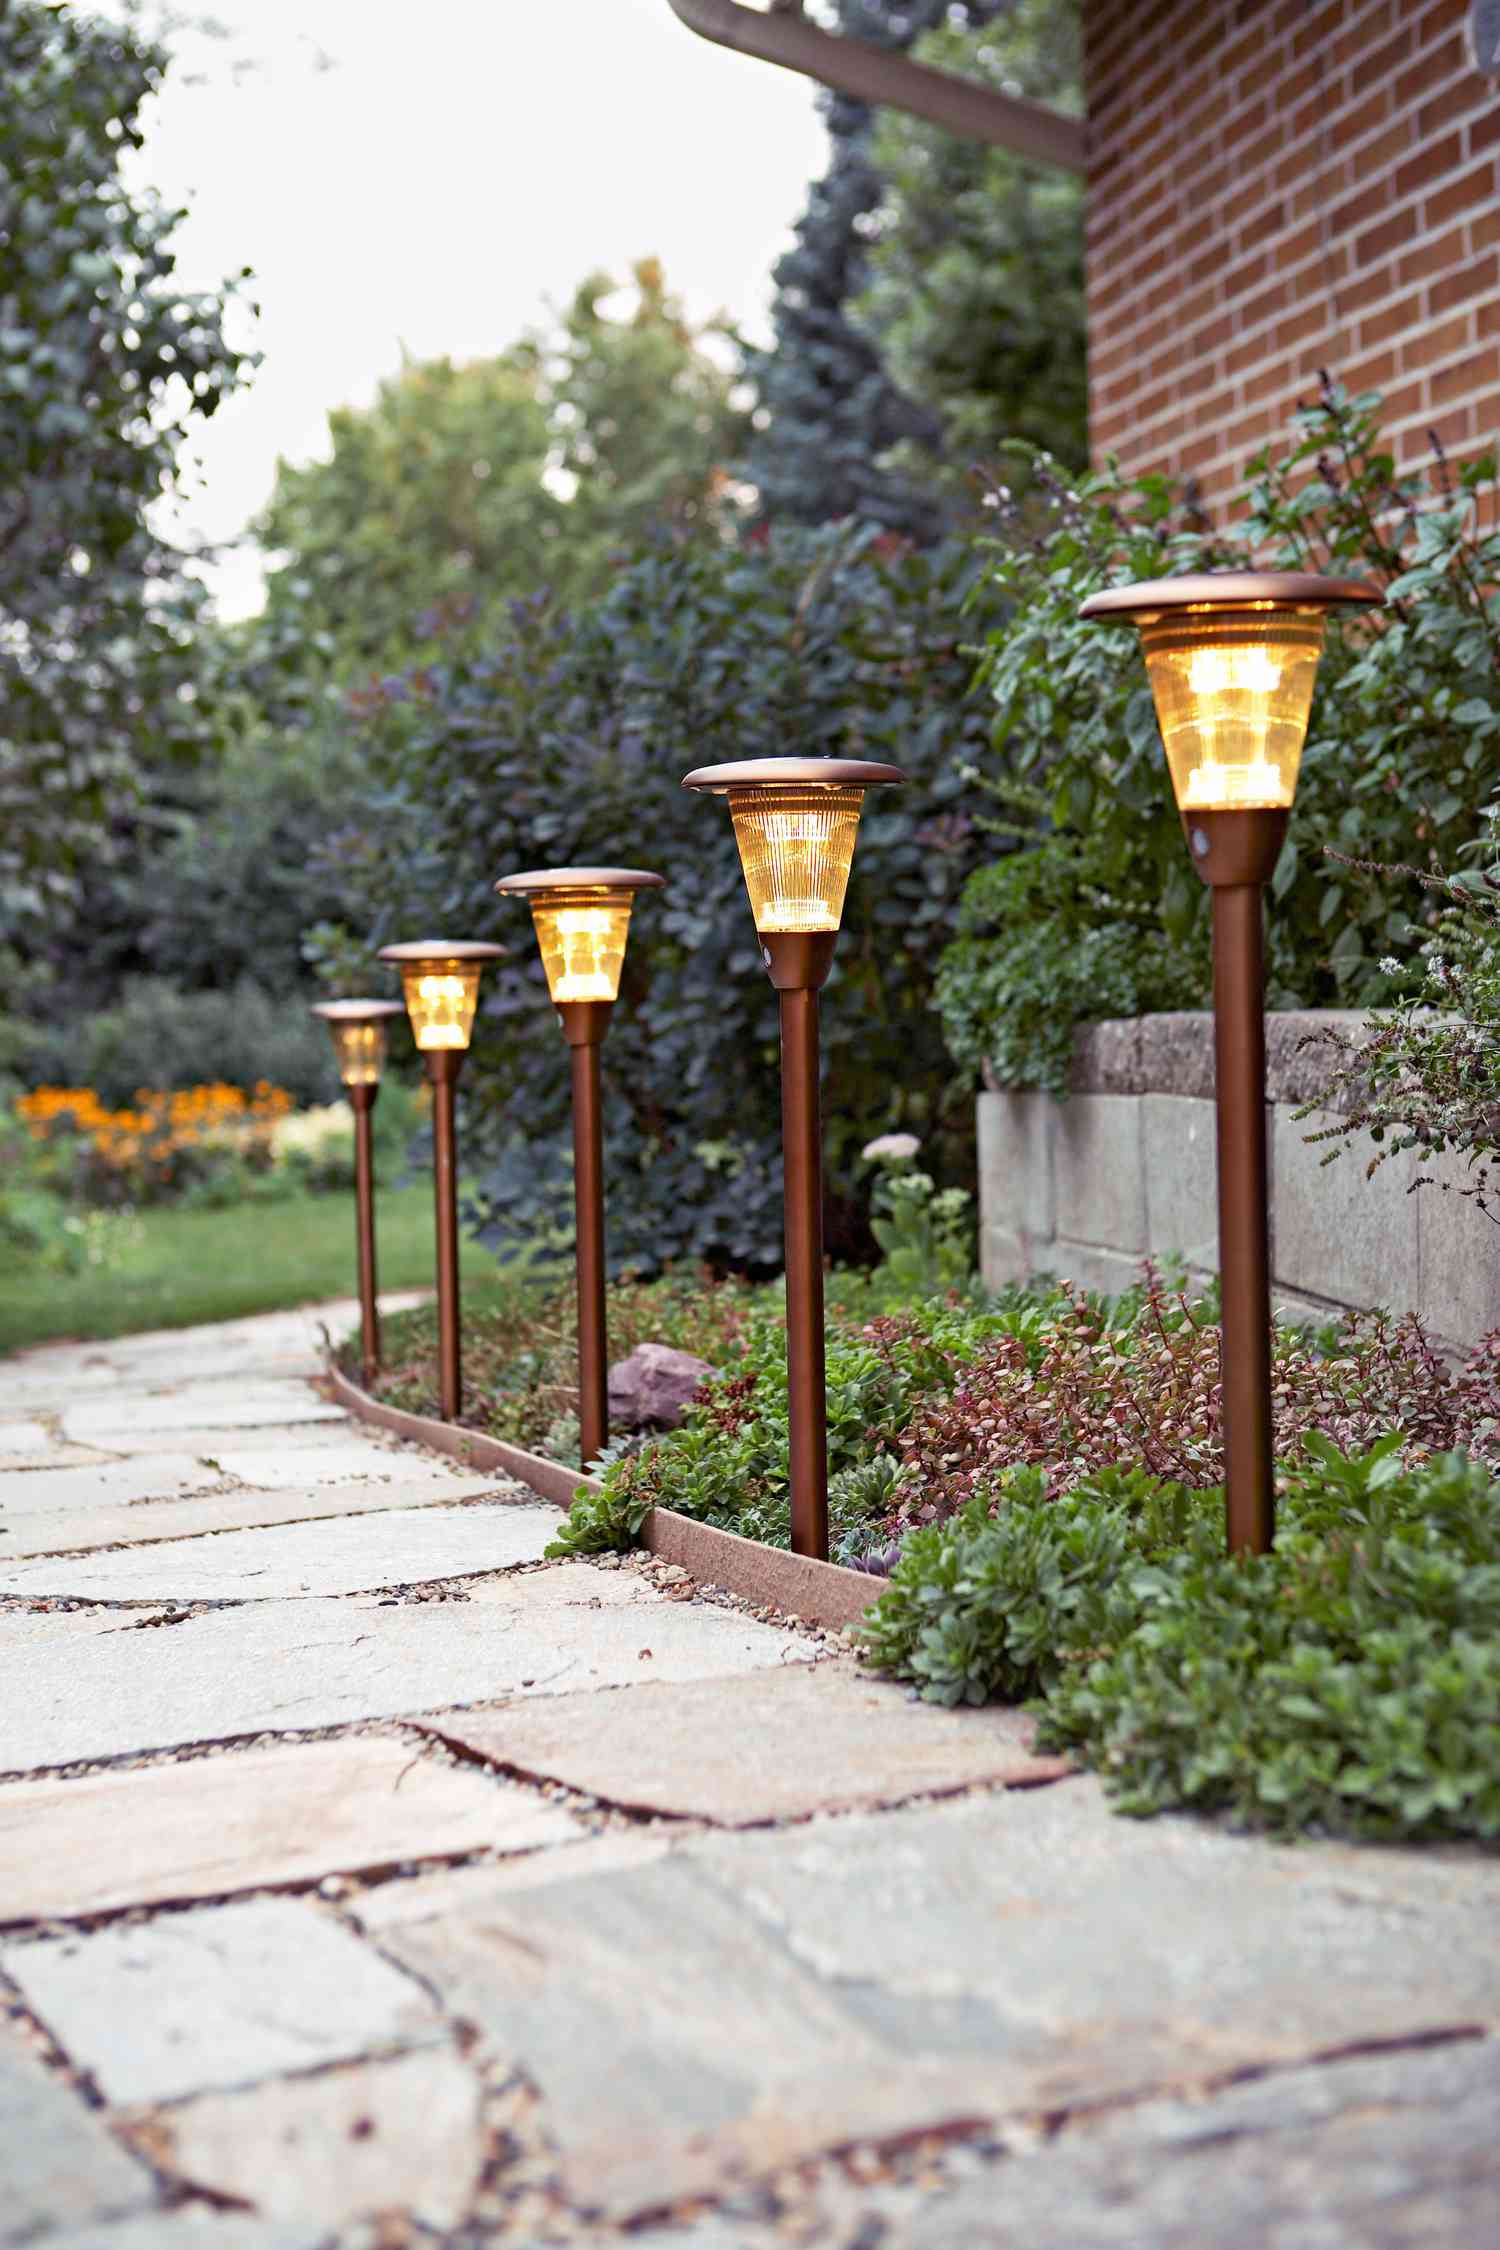 Beginners Overview to Home Landscape Lighting Service